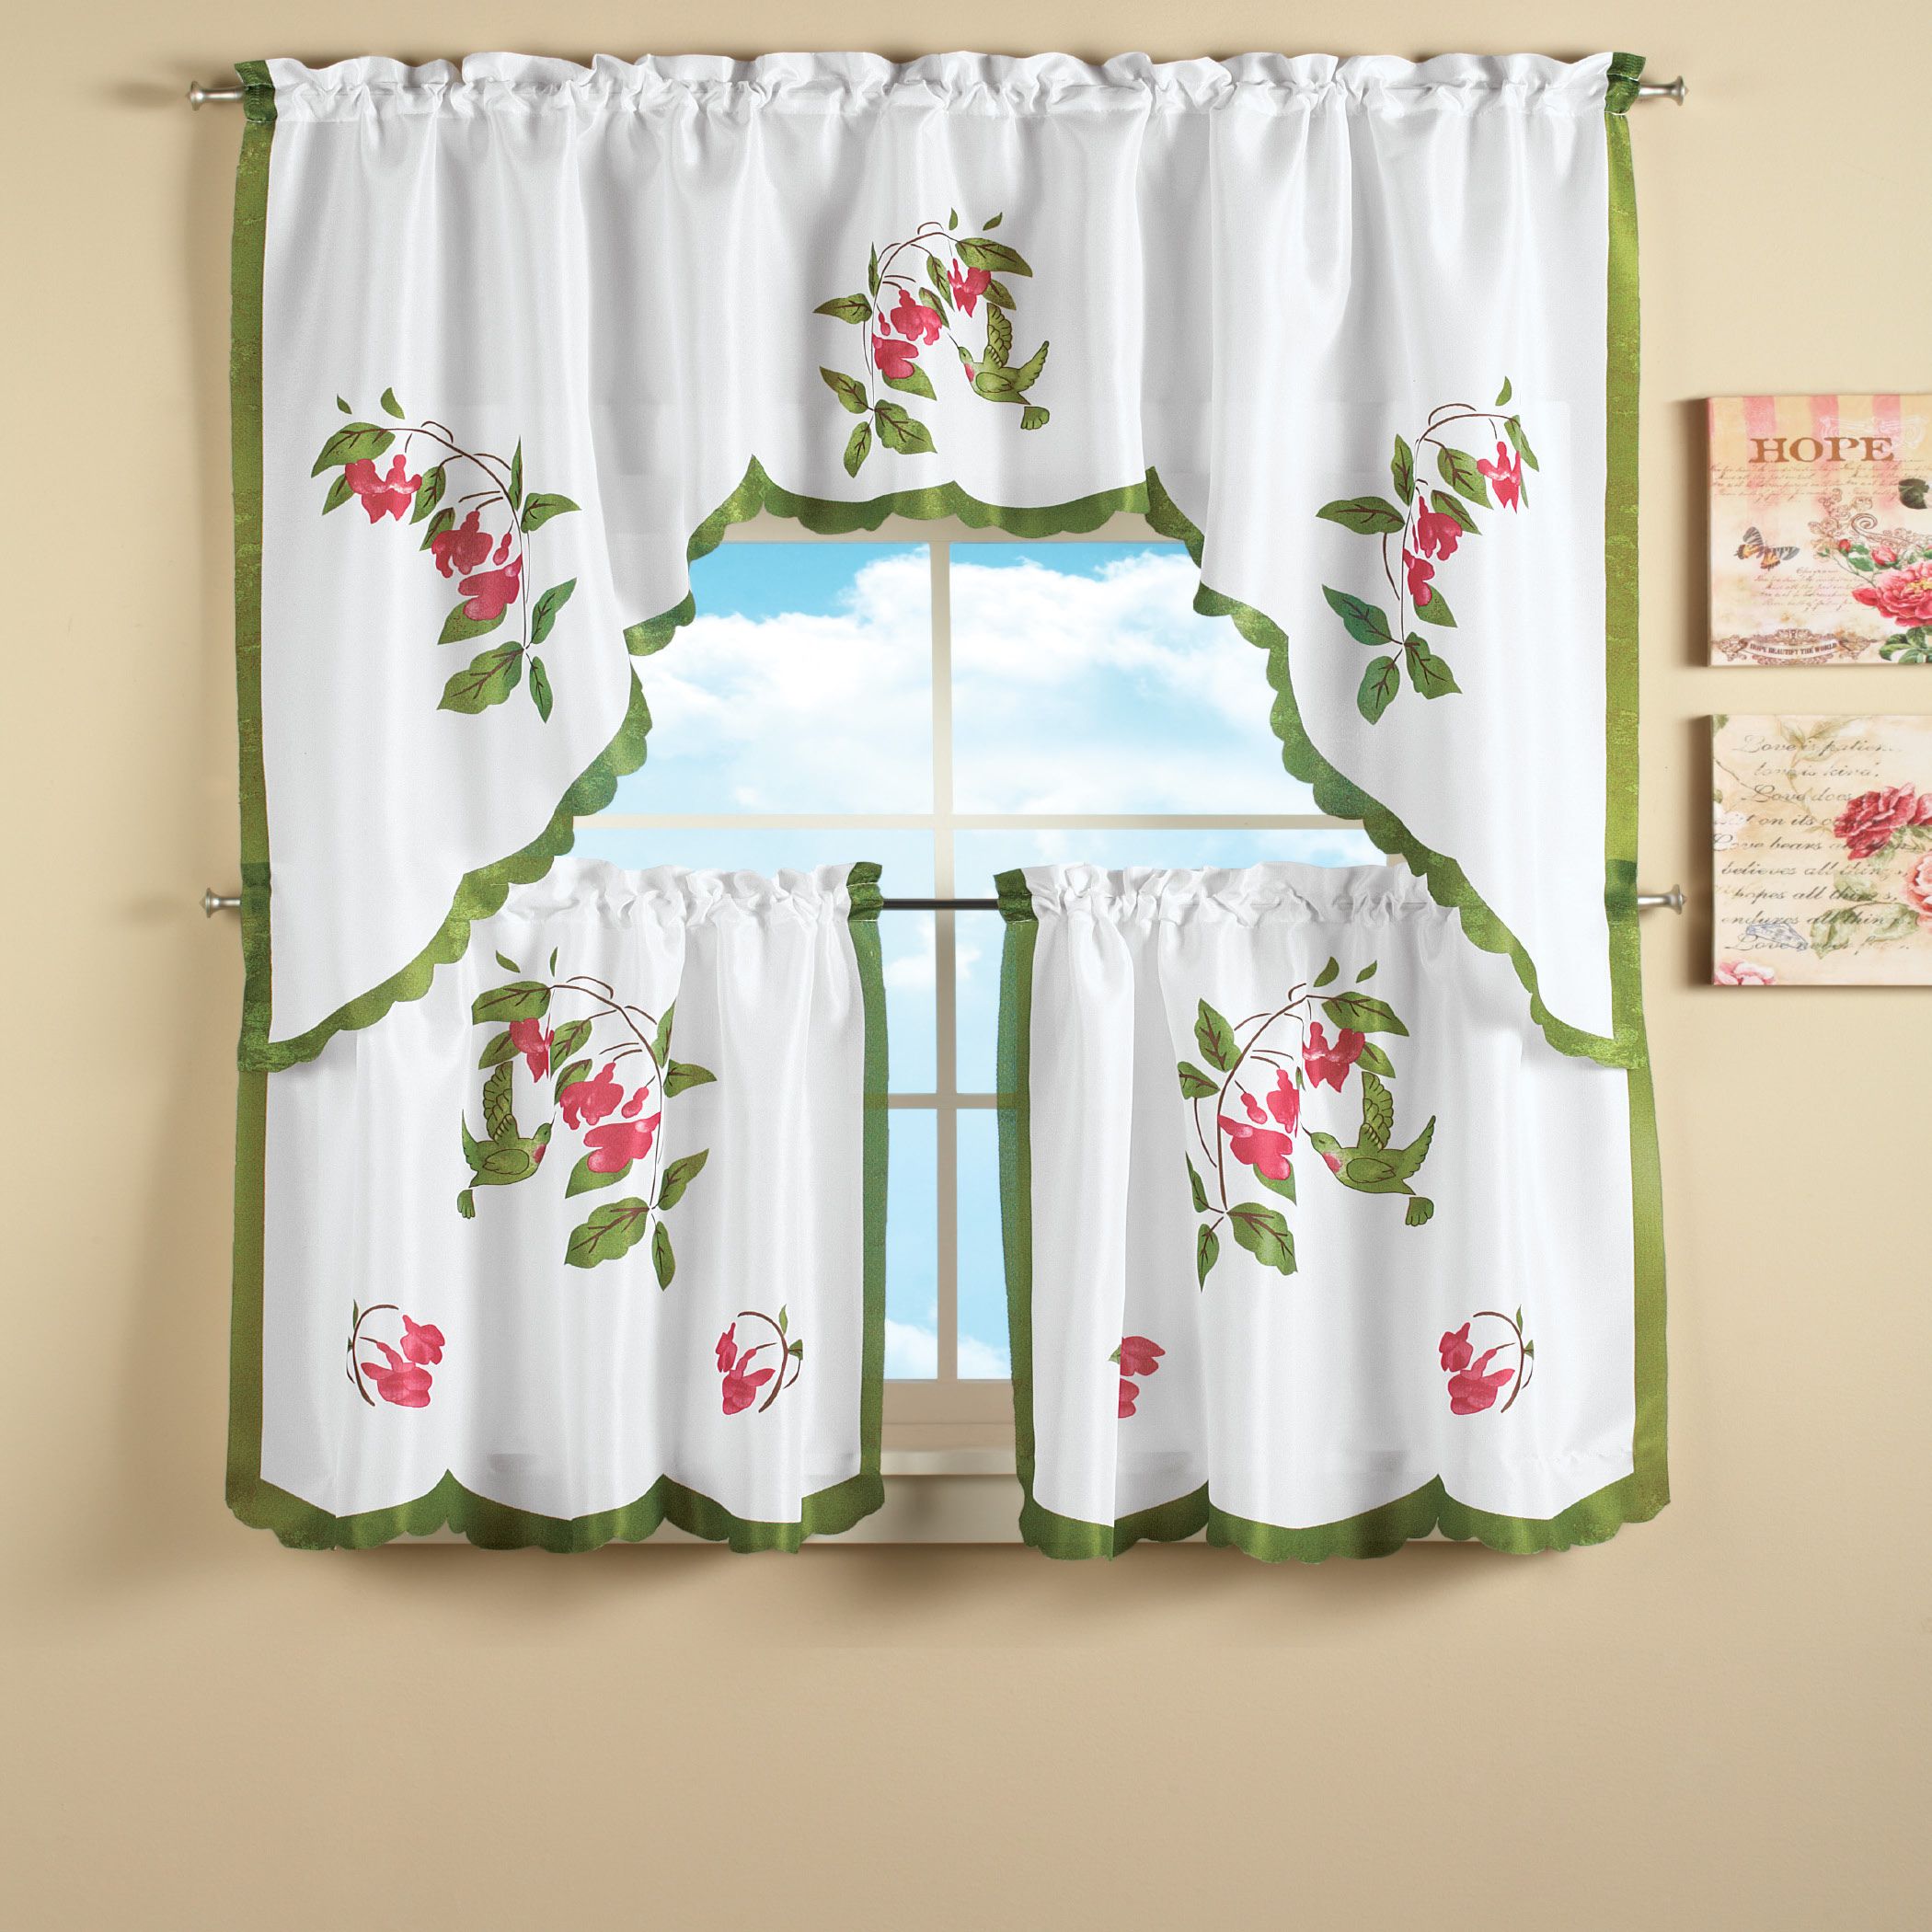 Hummingbird And Flowers Tier Curtain Set With Multicolored Printed Curtain Tier And Swag Sets (View 15 of 20)